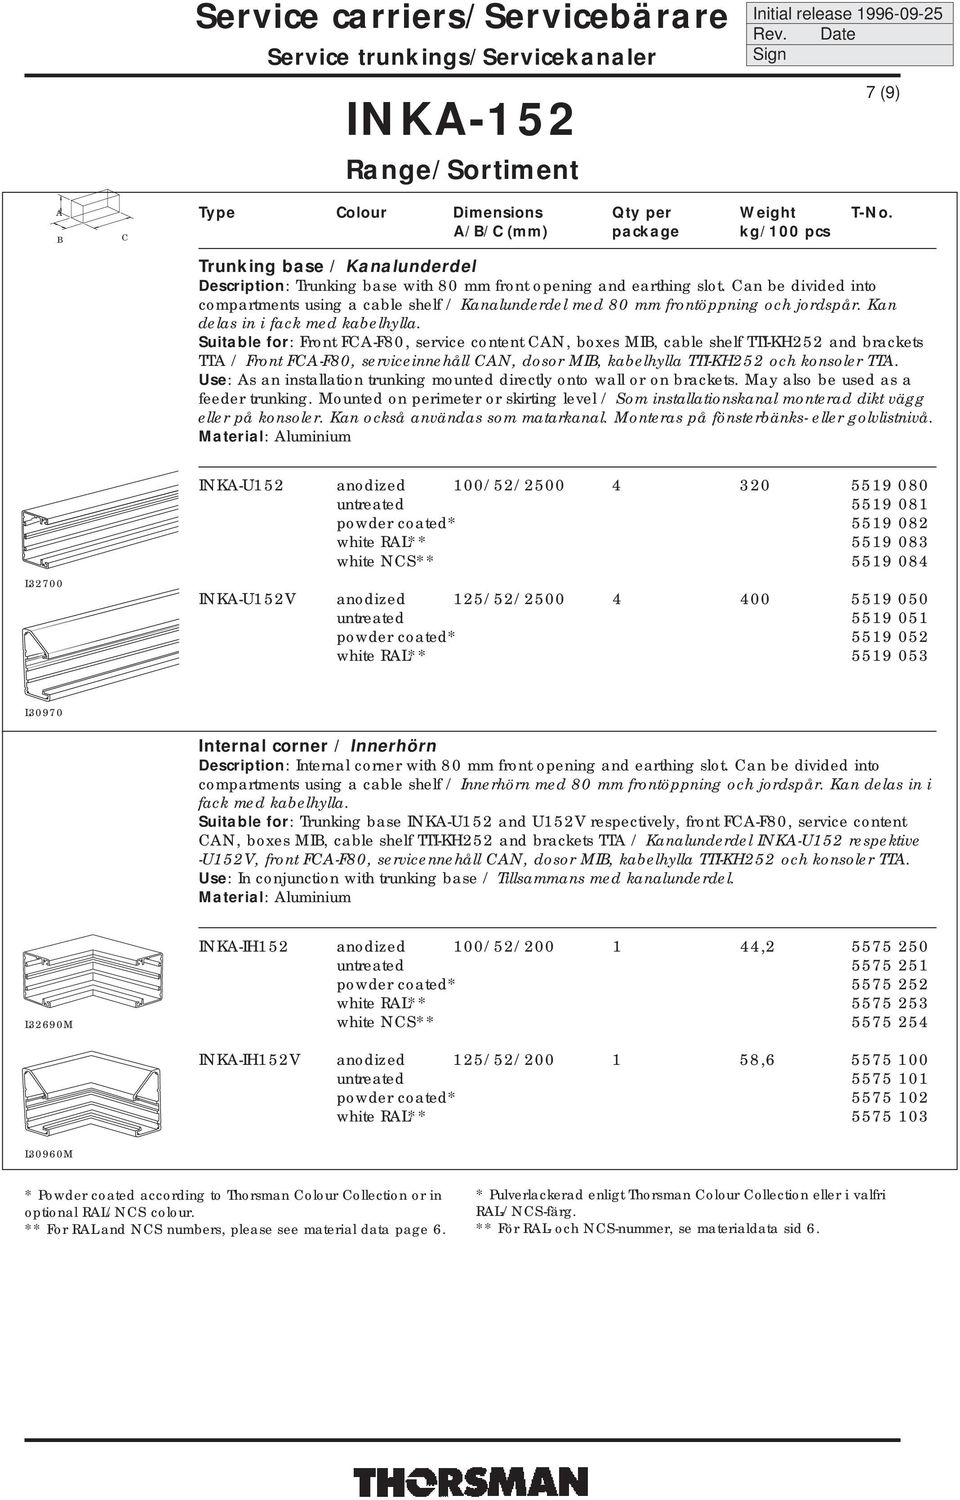 Suitable for: Front FCA-F0, service content CAN, boxes MIB, cable shelf TTI-KH and brackets TTA / Front FCA-F0, serviceinnehåll CAN, dosor MIB, kabelhylla TTI-KH och konsoler TTA.